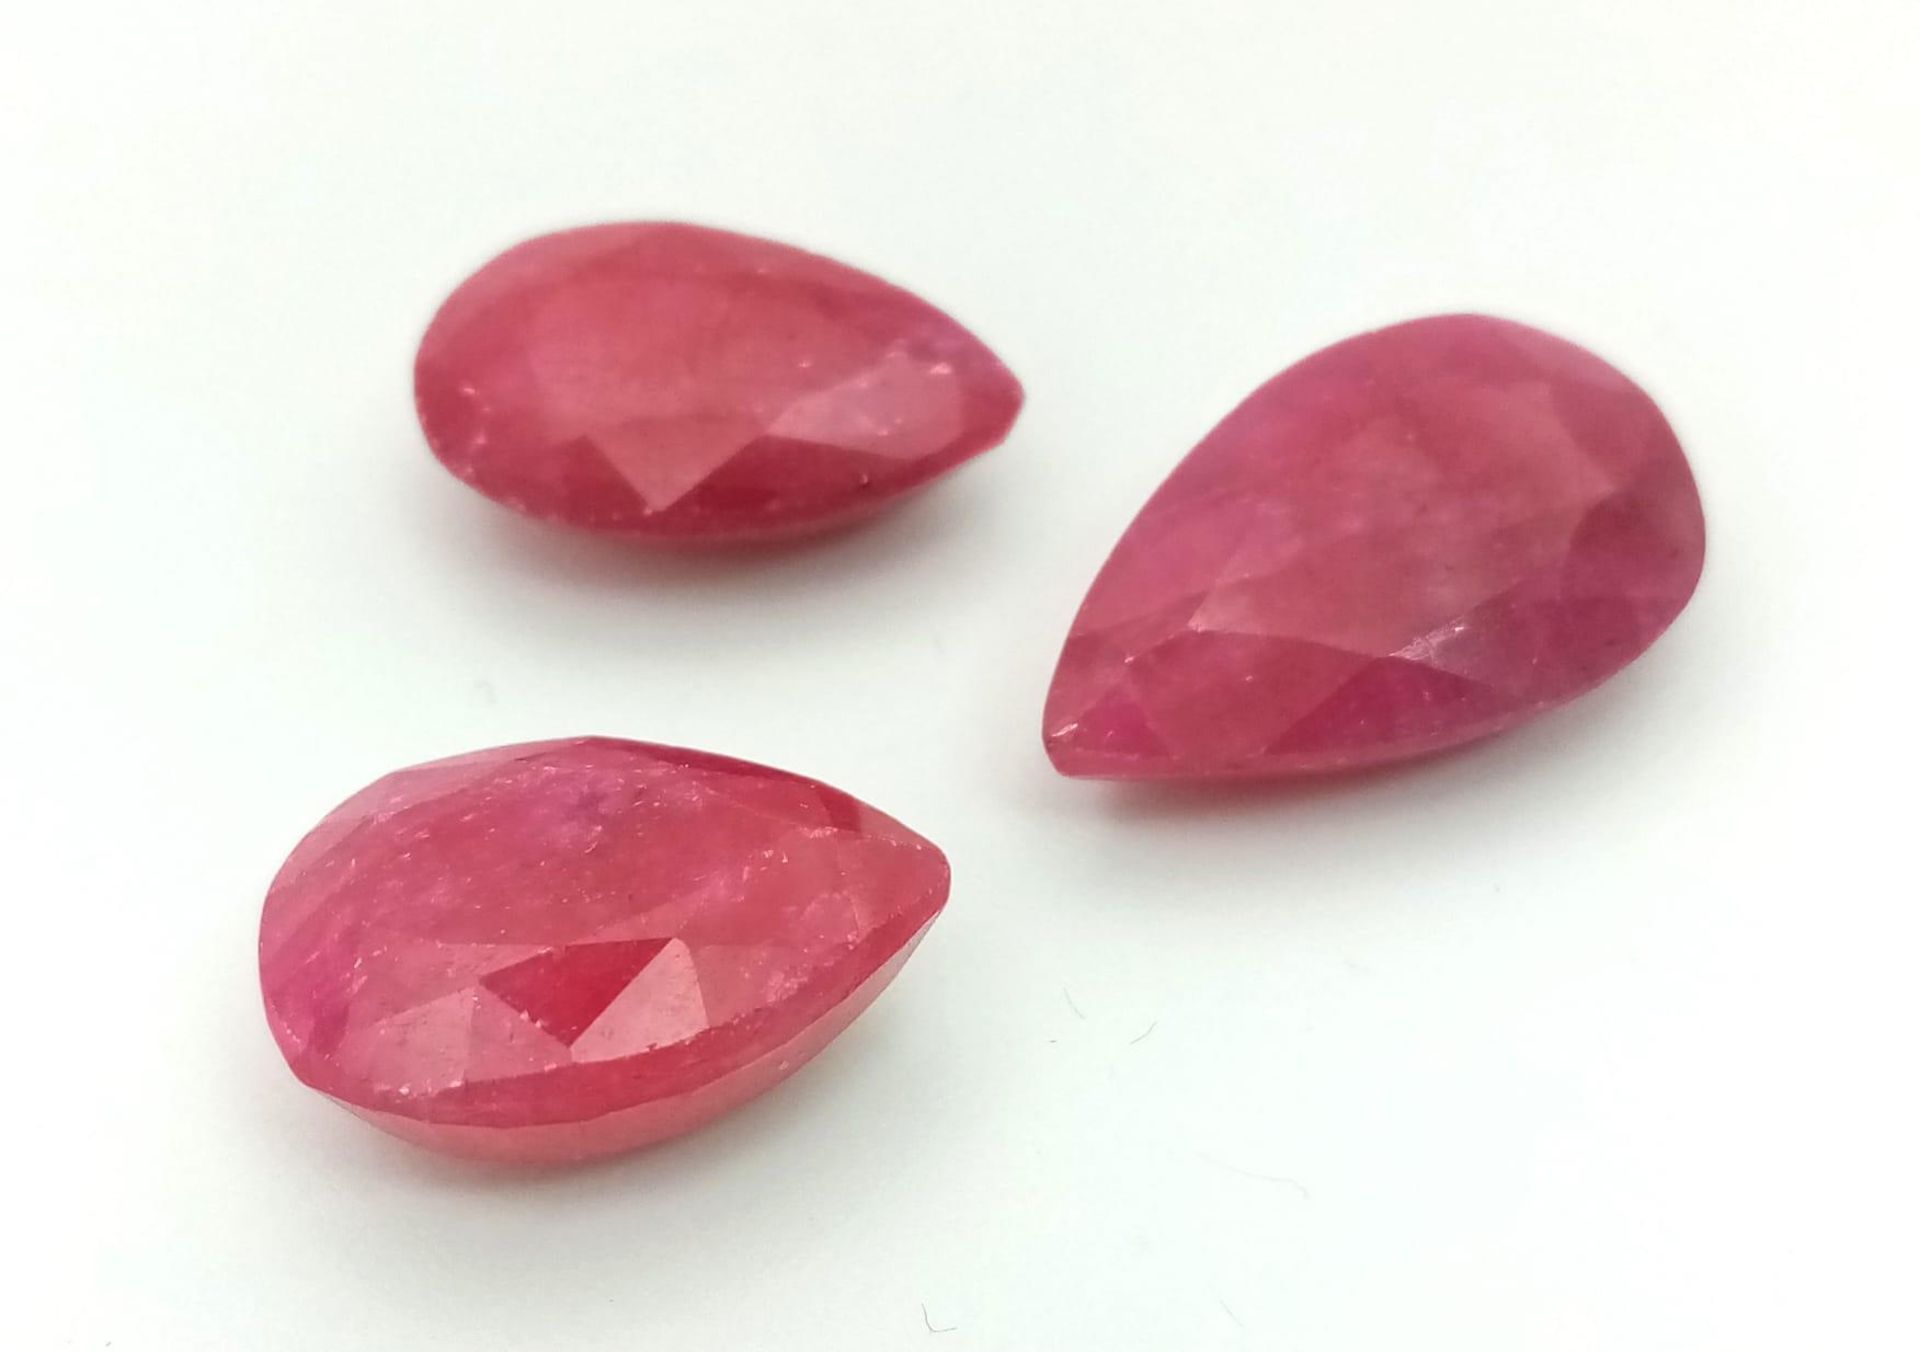 37.23 Ct Faceted Ruby Gemstones Lot of 3 Pcs, Pear Shapes, IGL&I Certified